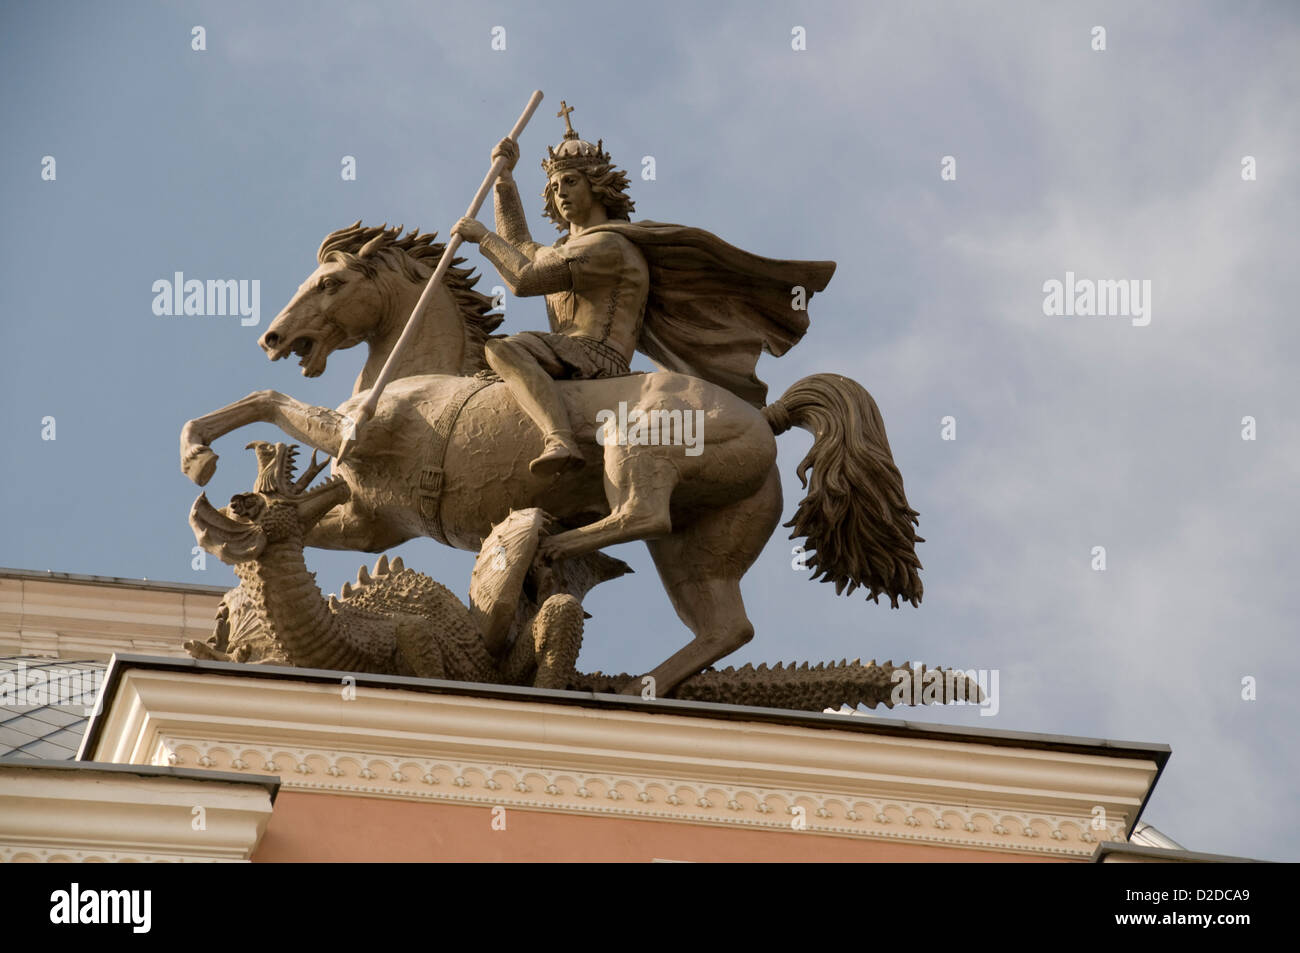 A sculpture of St.George and dragon on top of the Grand Duke Palace in the main shopping area of Gedimino Avenue in Vilnius, Lithuania, Stock Photo